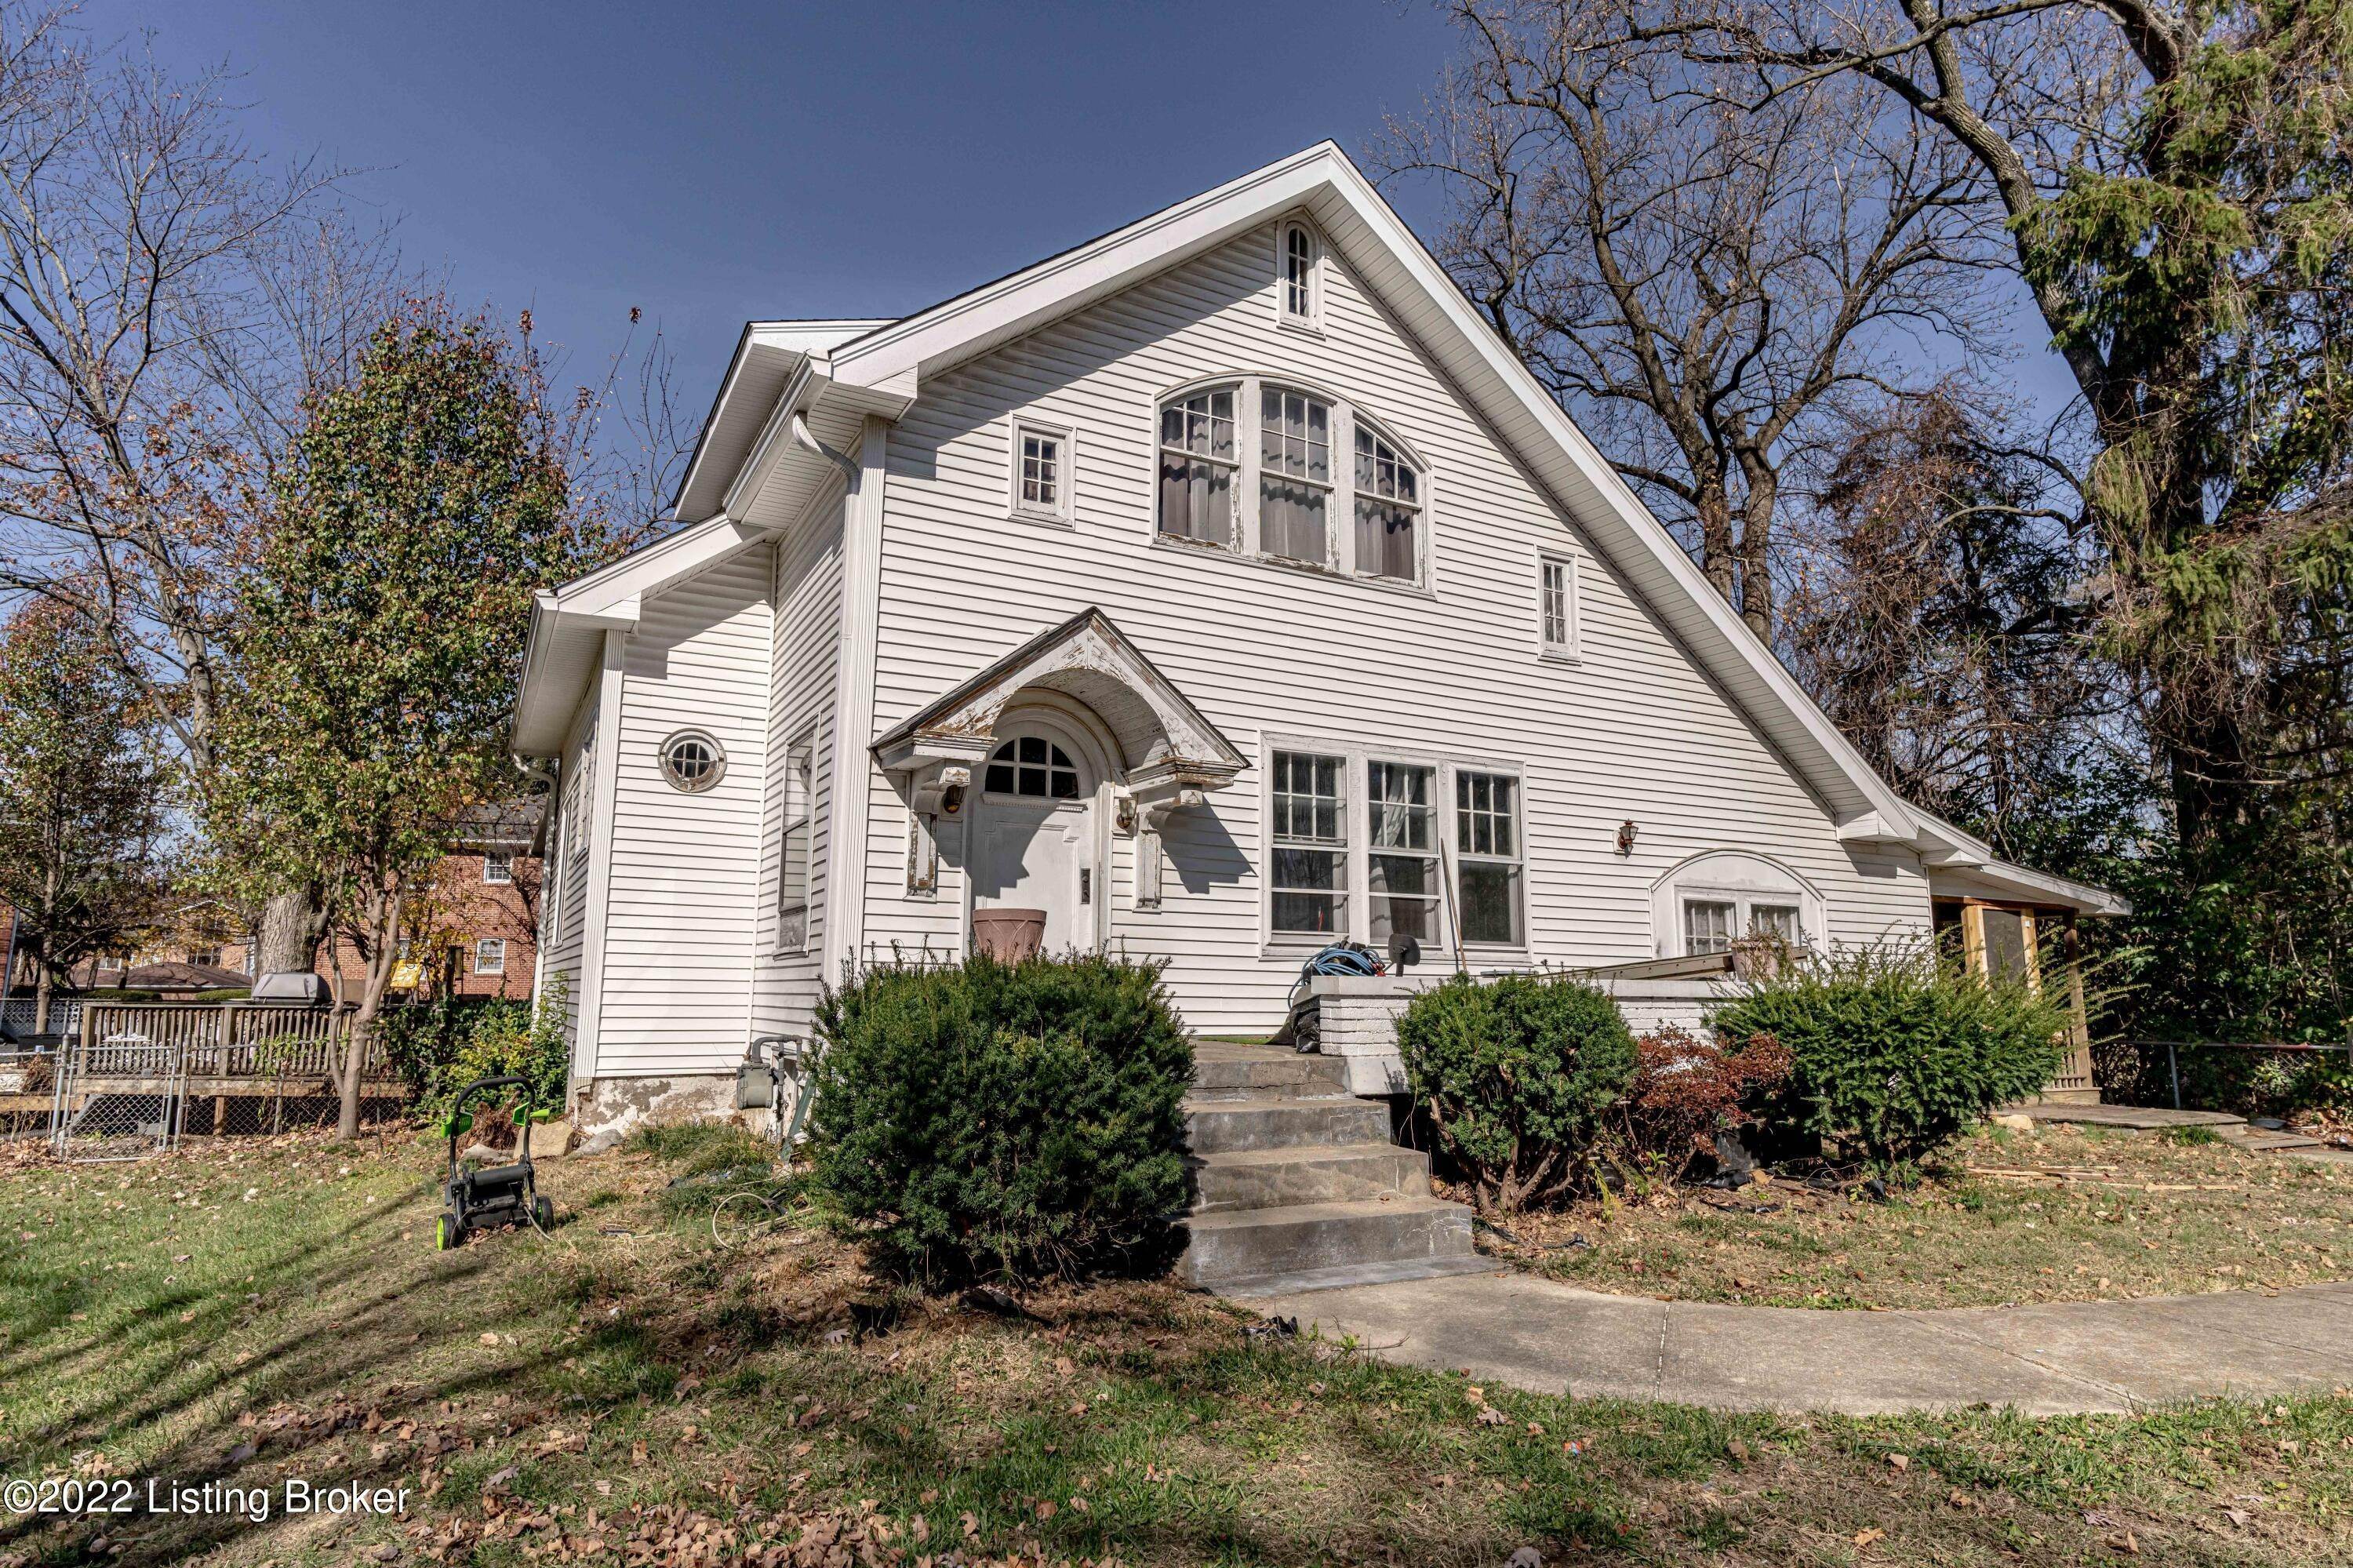 Single Family at Louisville, KY 40218